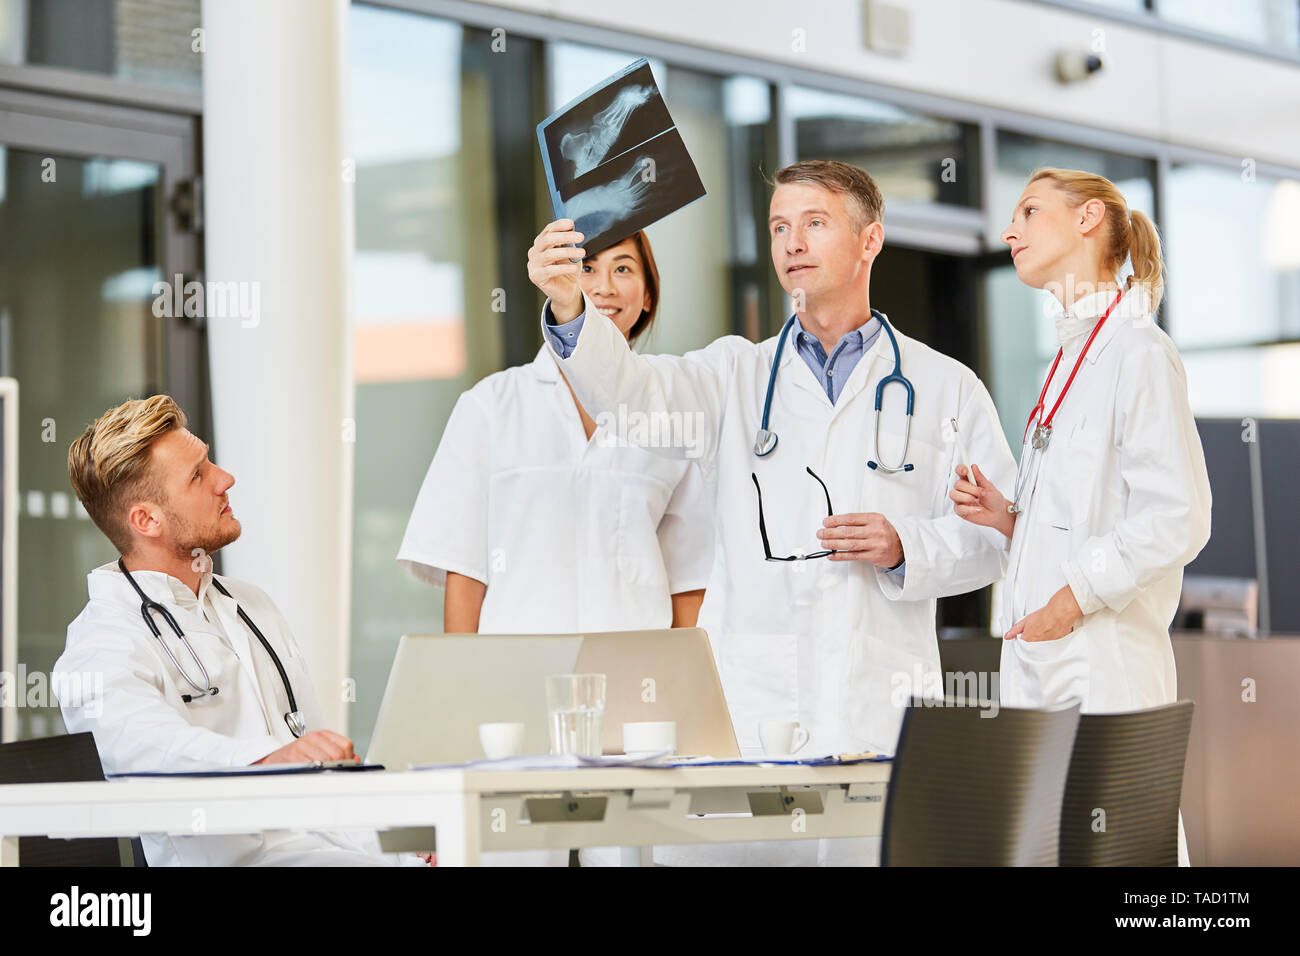 Lecturer or senior physician analyzes an X-ray together with his radiology team Stock Photo